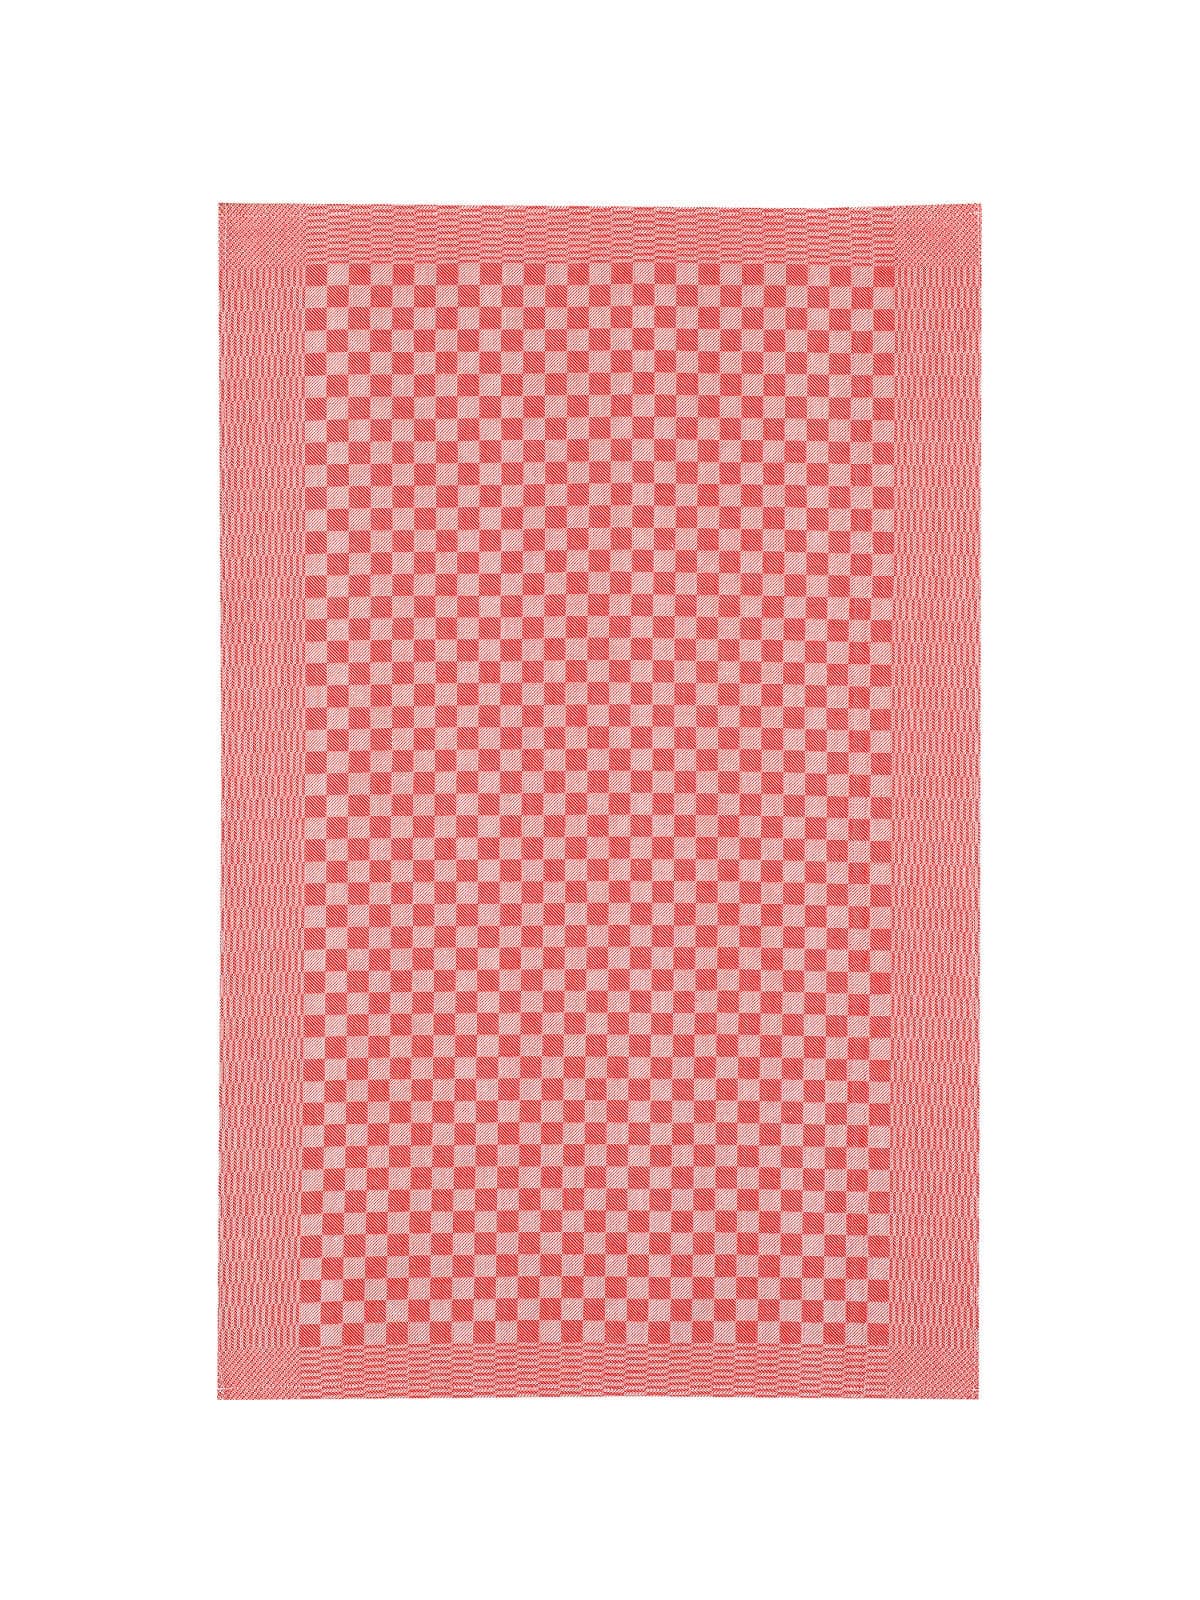 Pit Towel Red - 12 Pcs by  Kitchen & Table Linens.